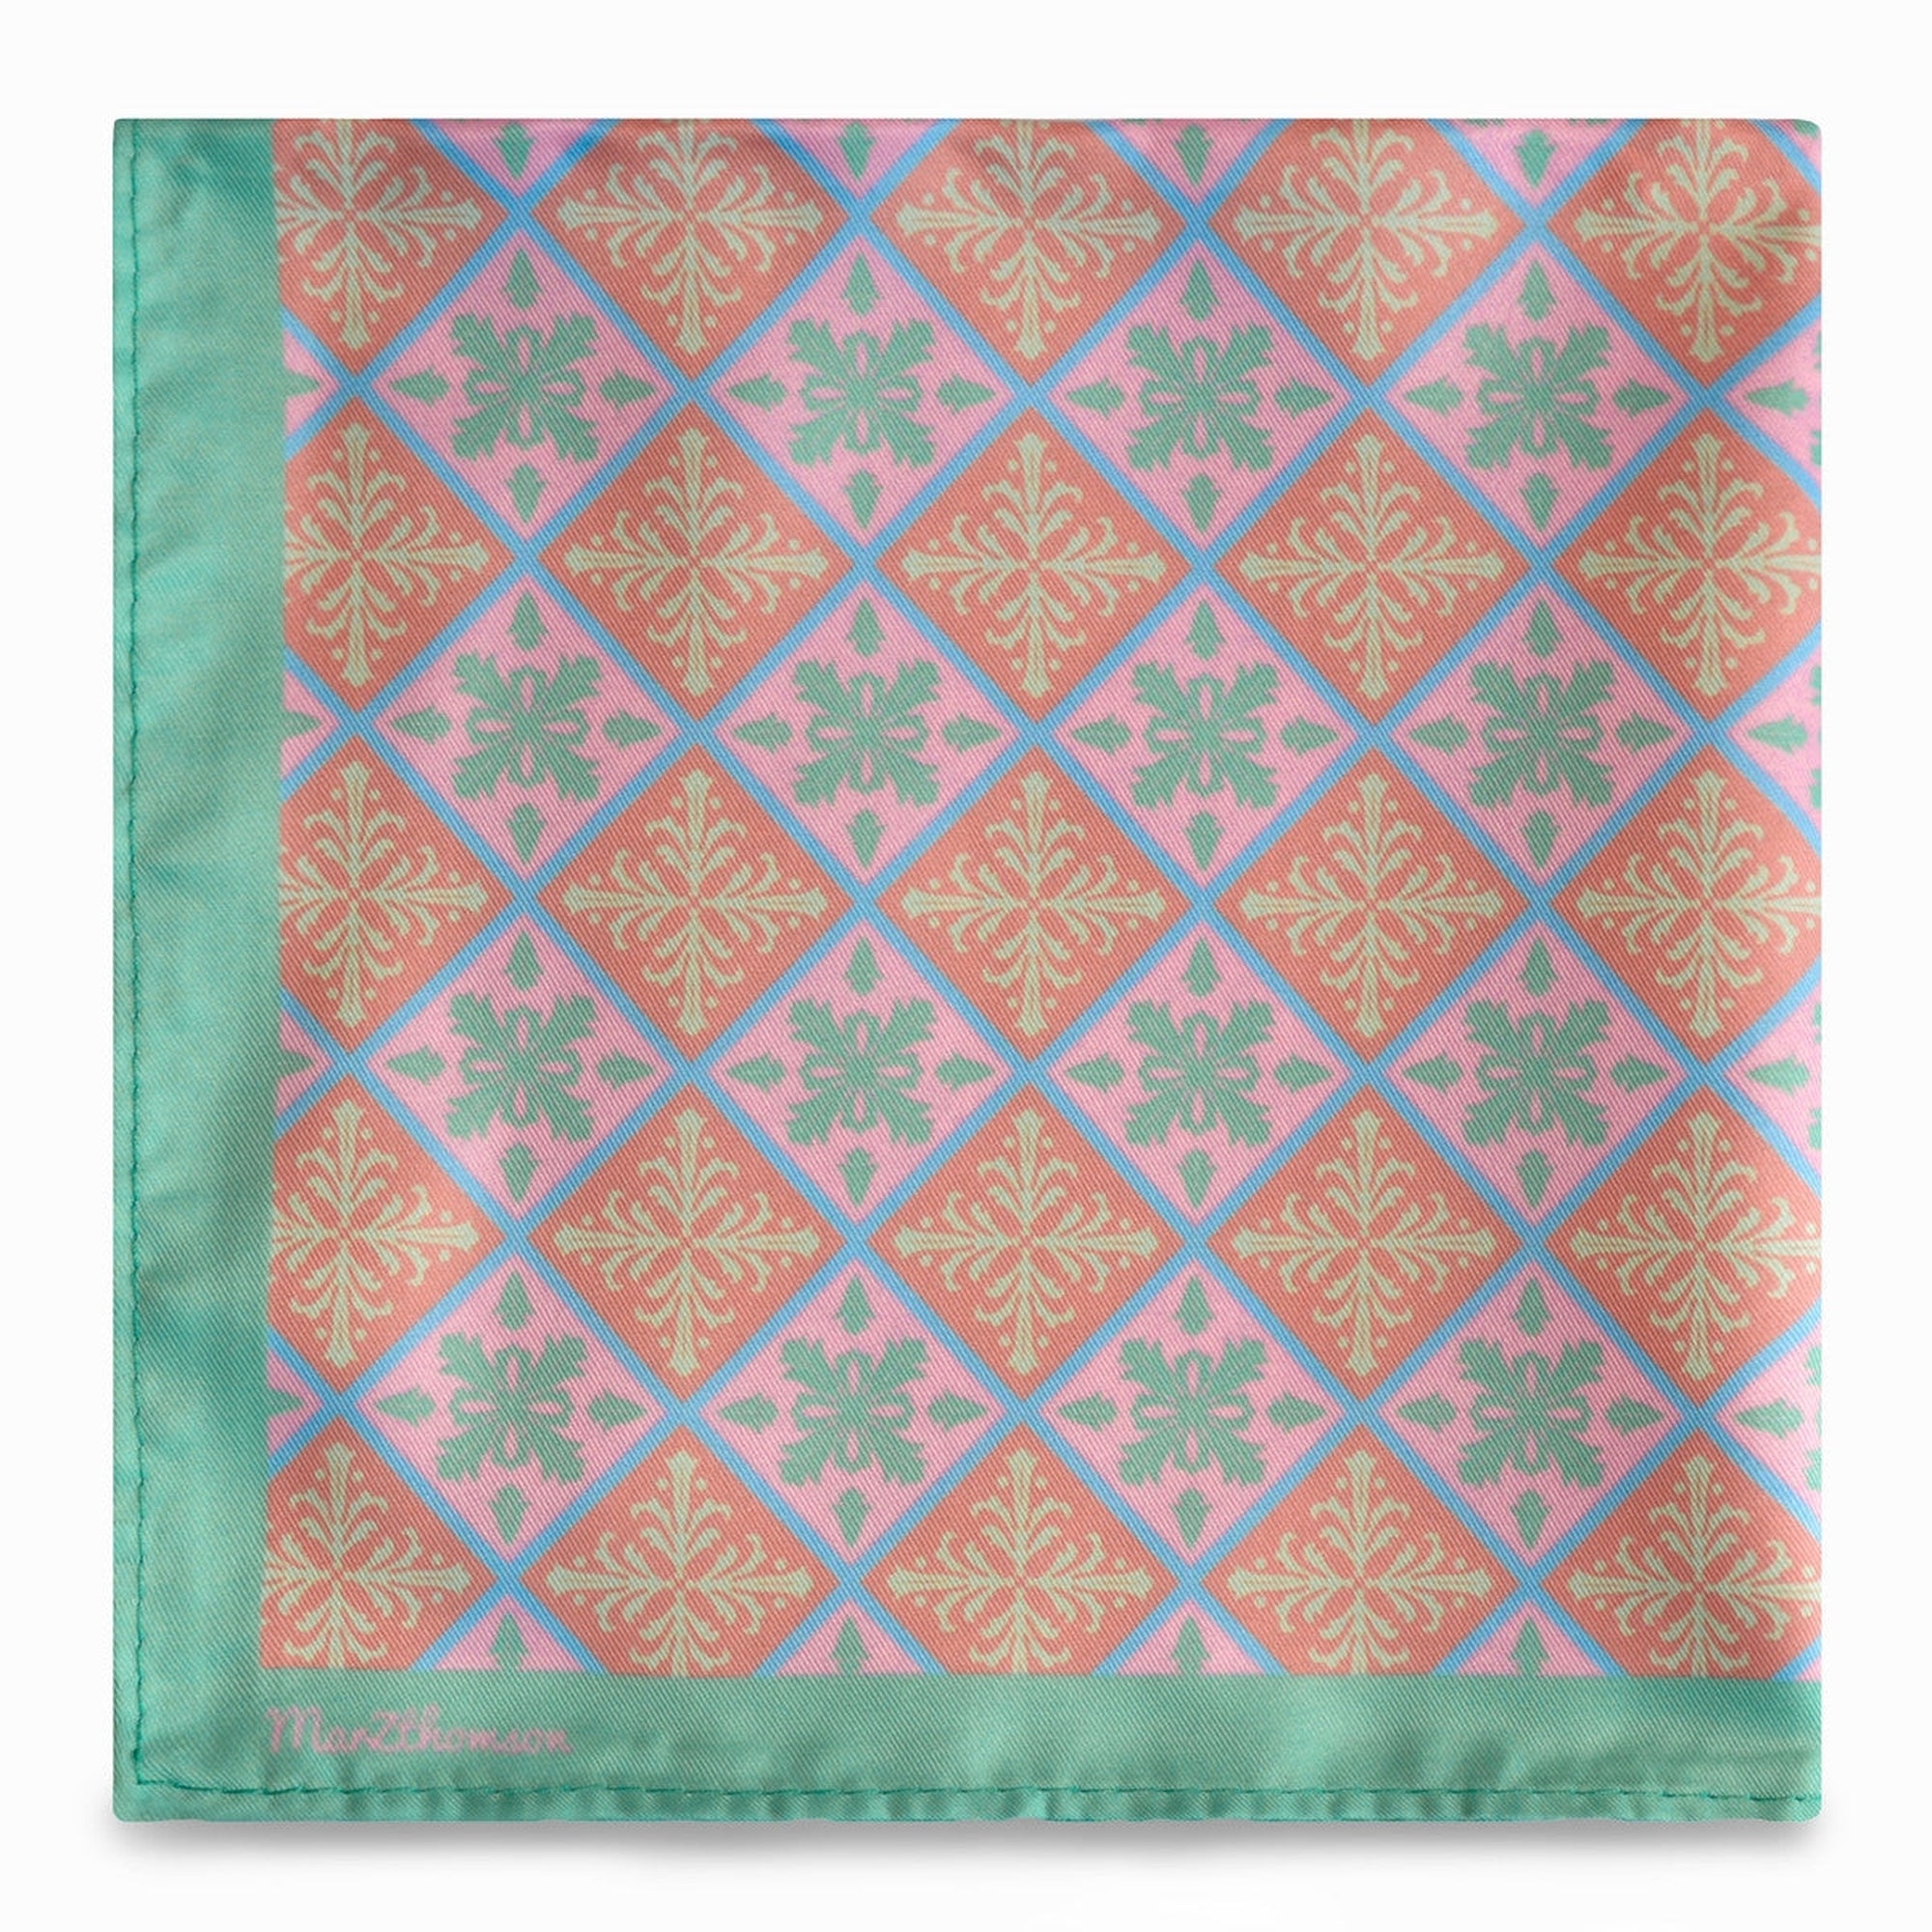 Peranakan Tiles Pocket Square in Pink and Green-Pocket Squares-MarZthomson-Cufflinks.com.sg